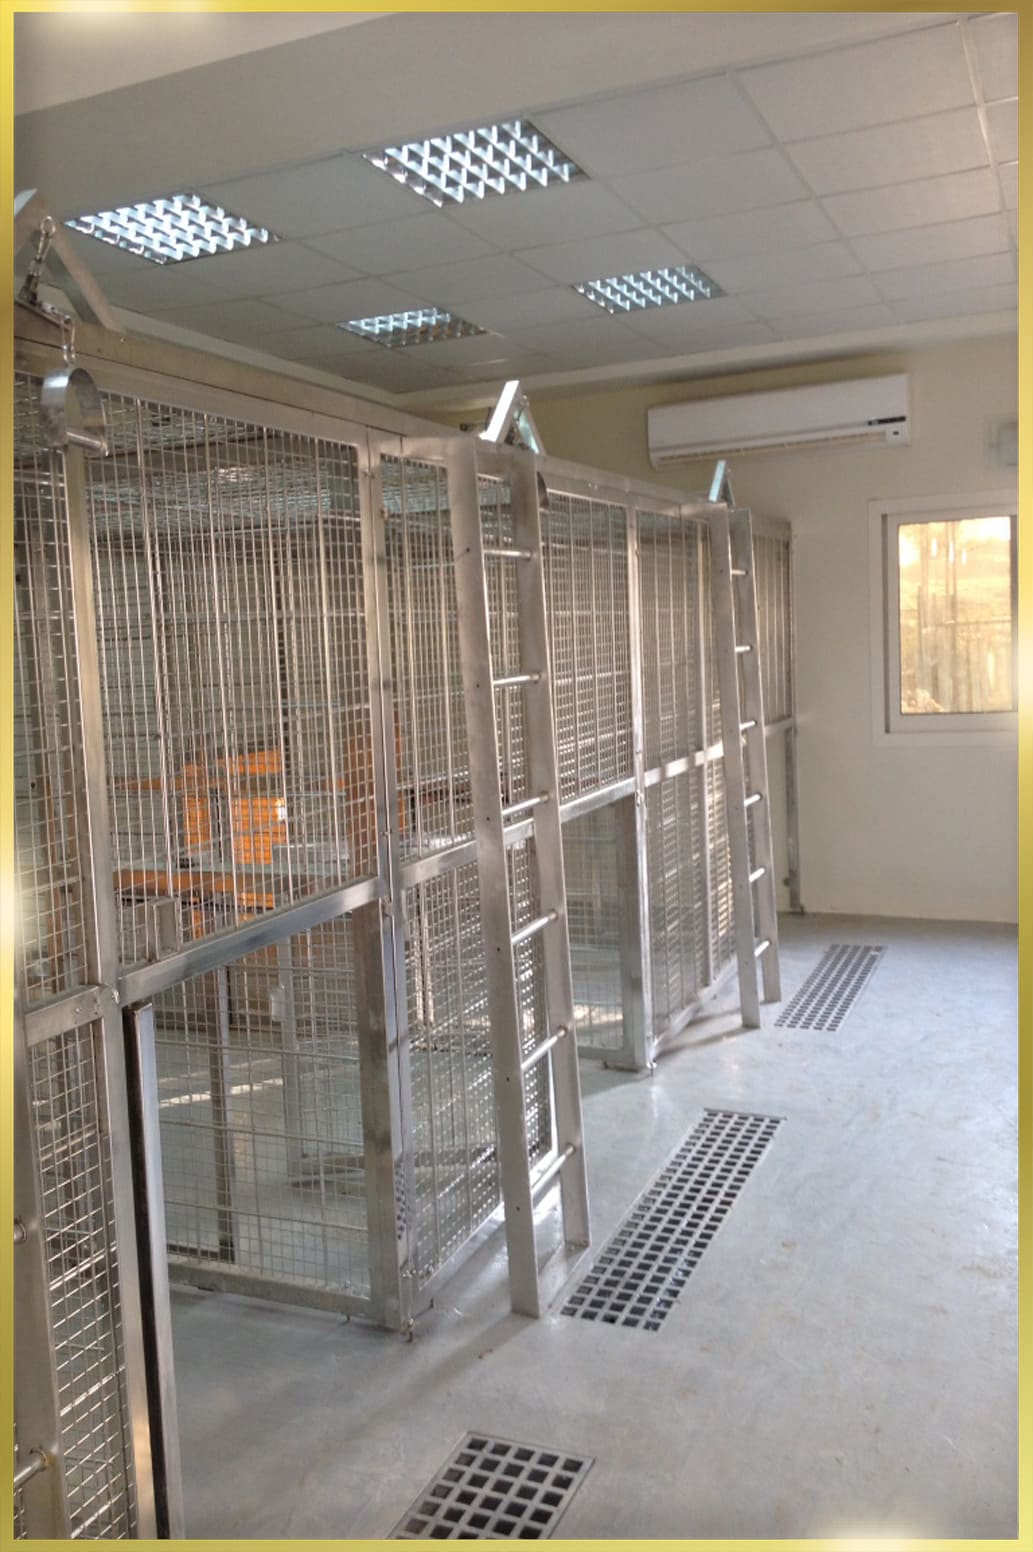 Stainless Steel Animal Housing Contractors for Crowne Prince Zoo